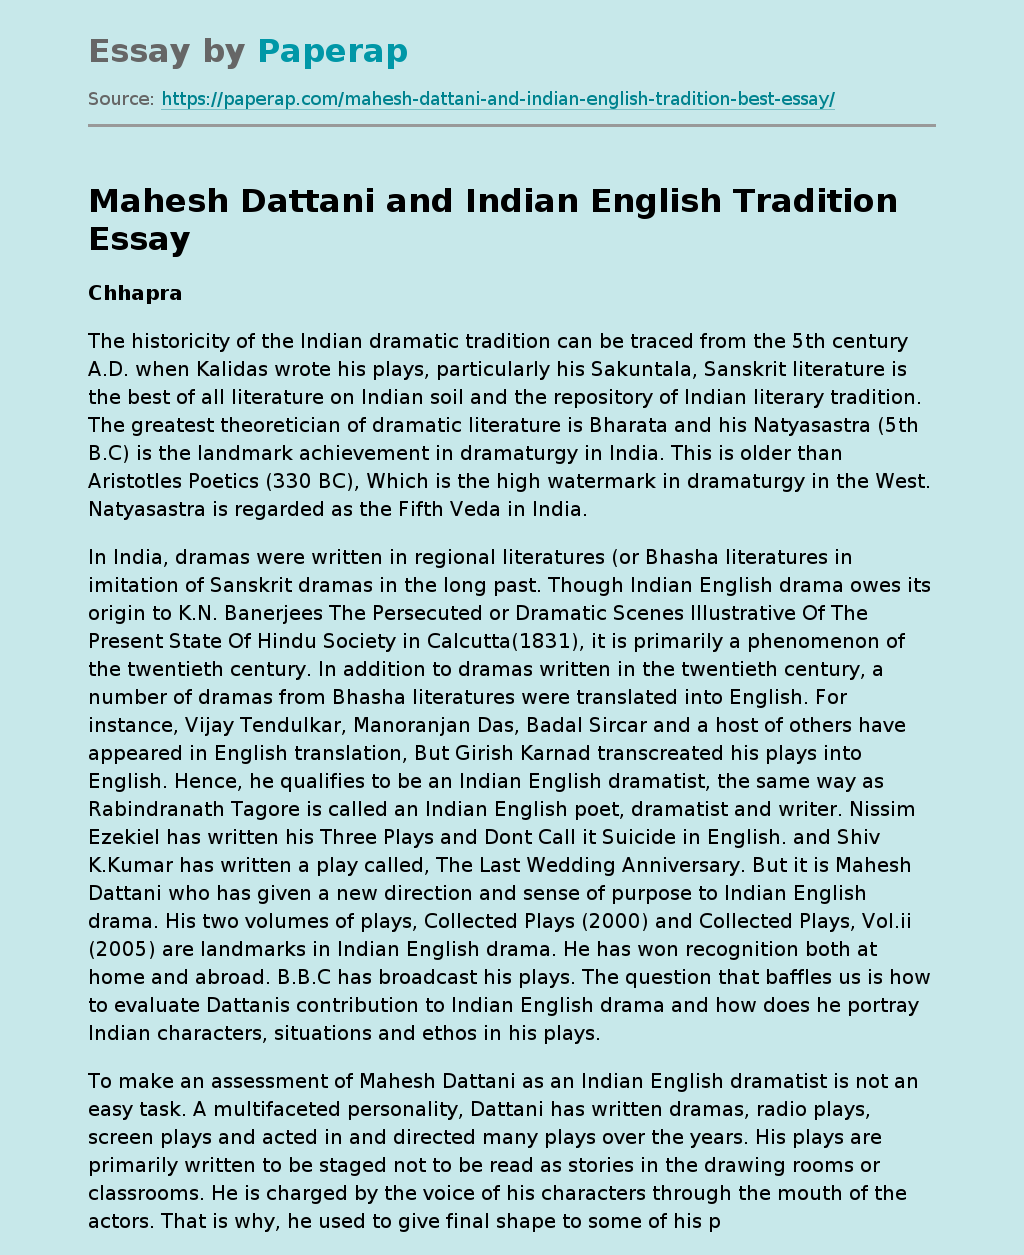 Mahesh Dattani and Indian English Tradition